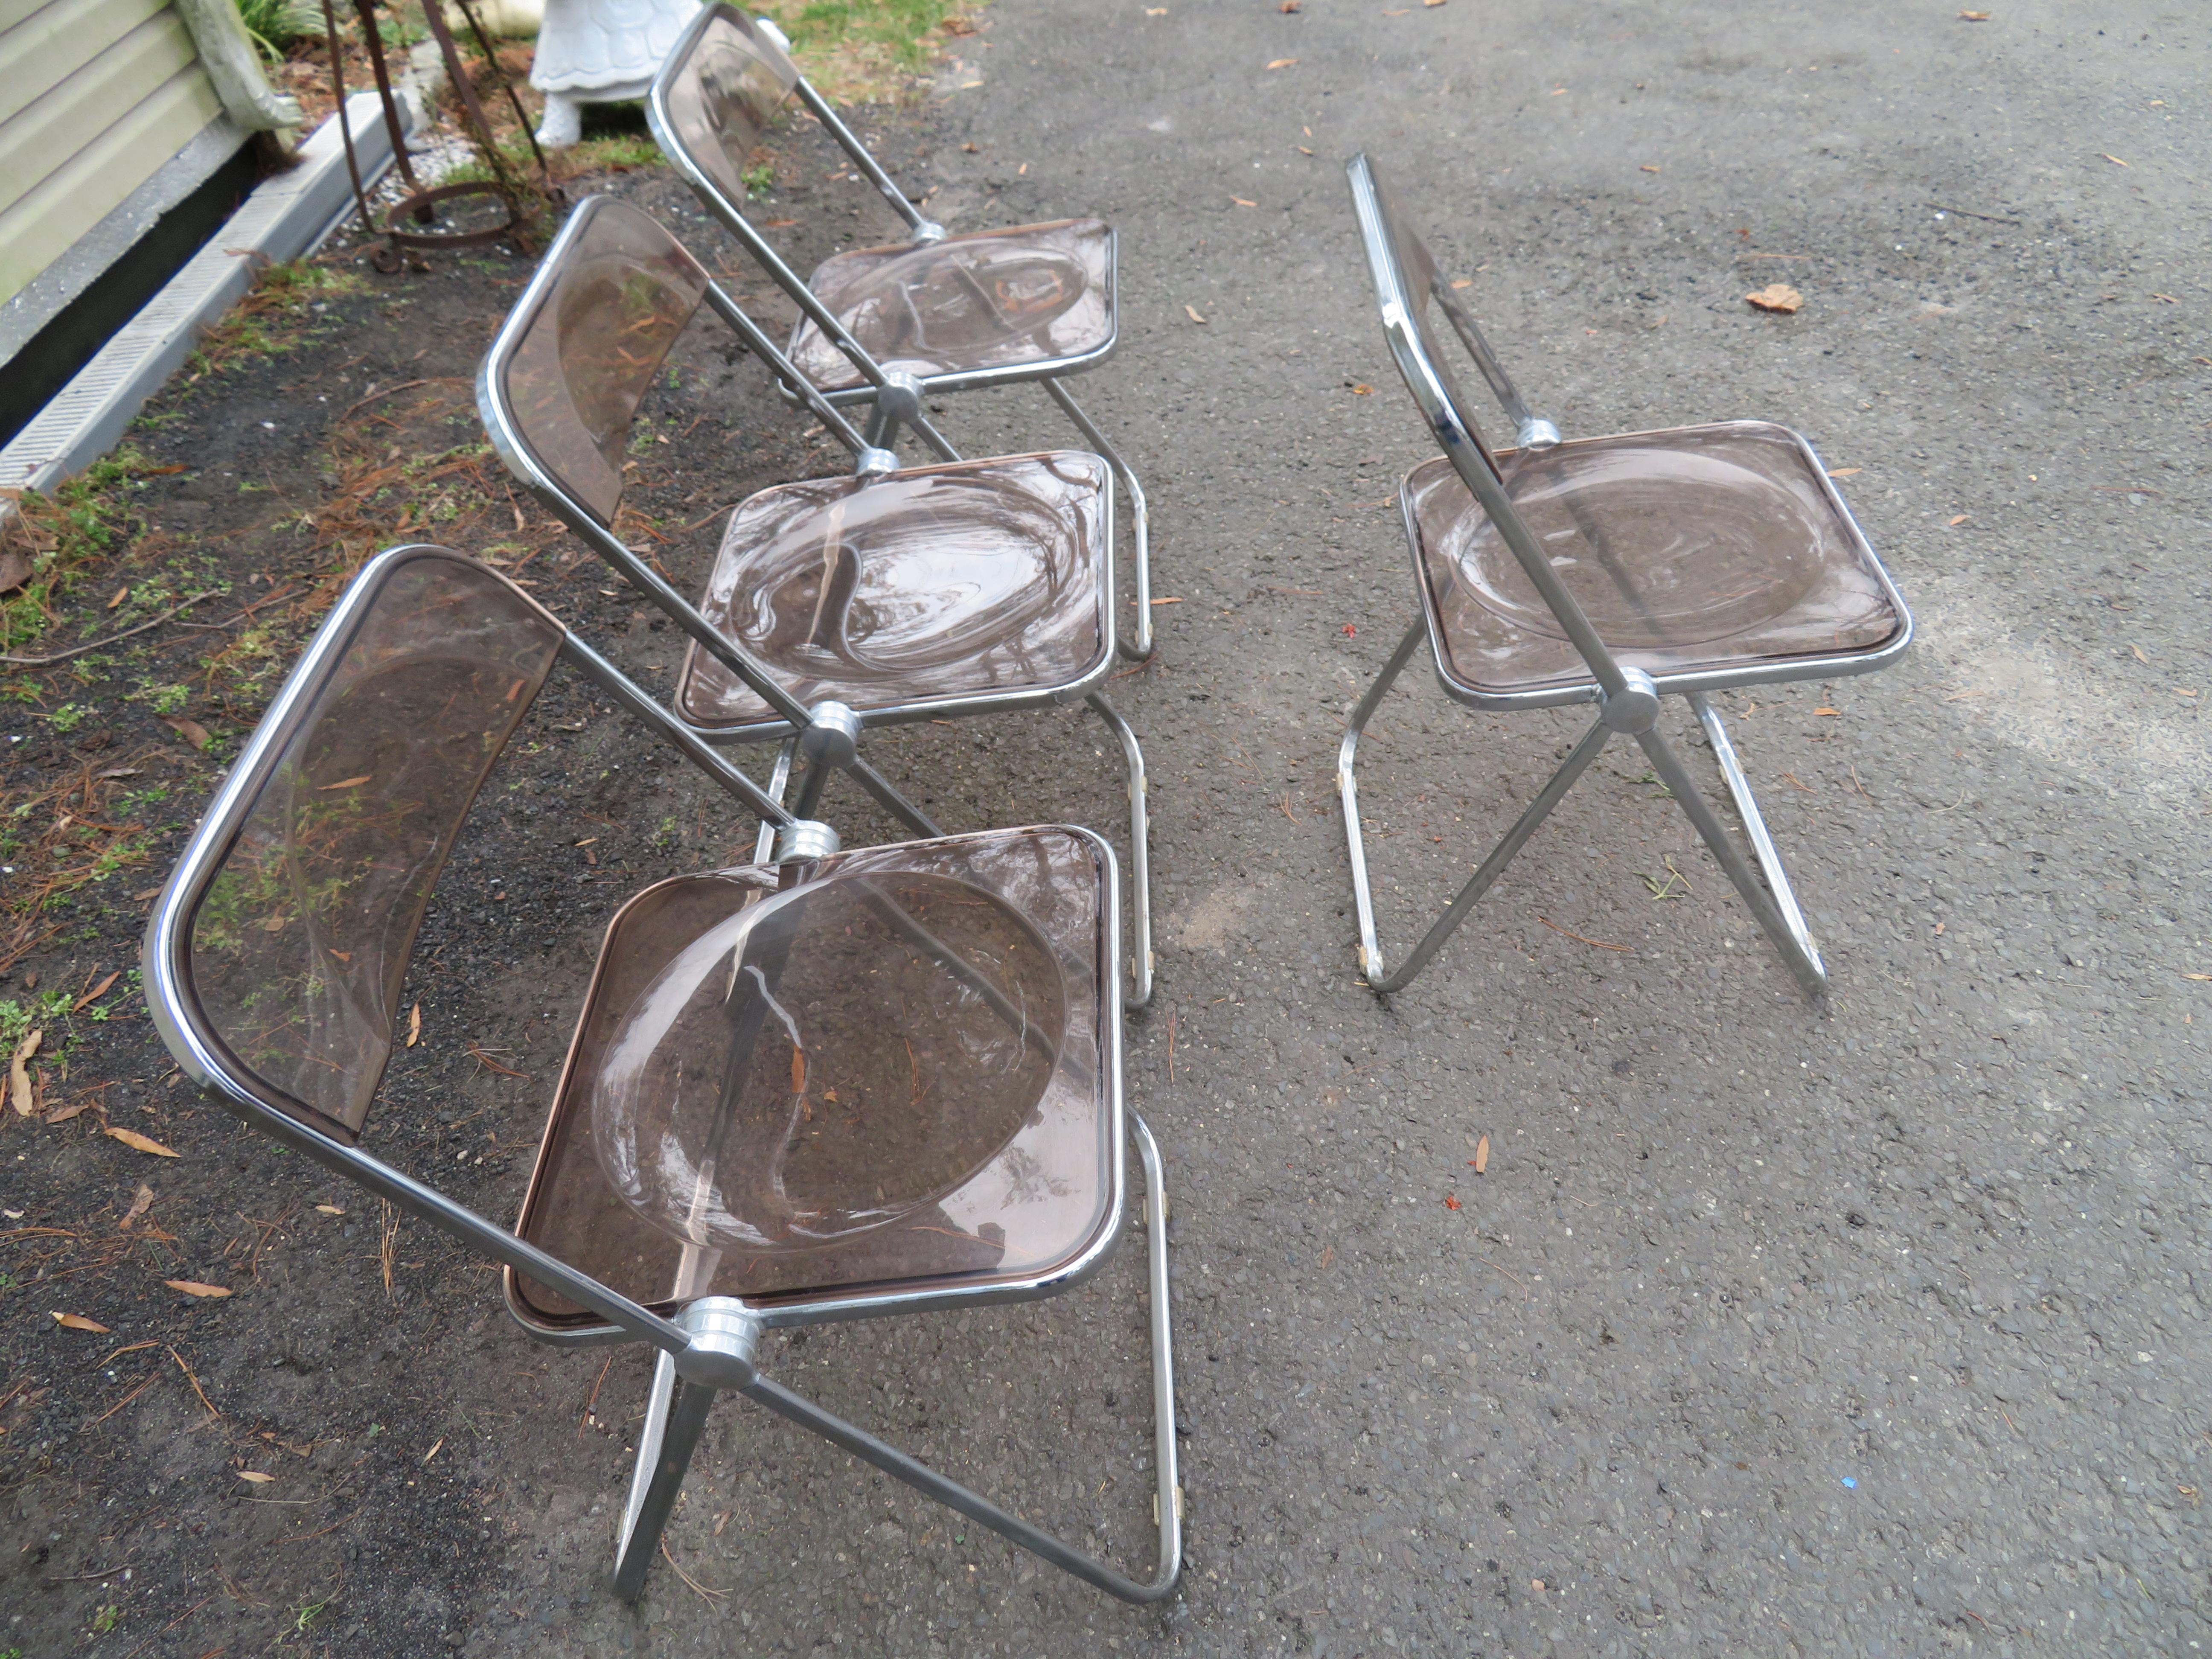 Wonderful set of 4 folding chairs, made of chrome and smoked Lucite, by Castelli, made in Italy for Krueger, circa 1960s. Chairs are in nice vintage condition. The dimensions are 18.5